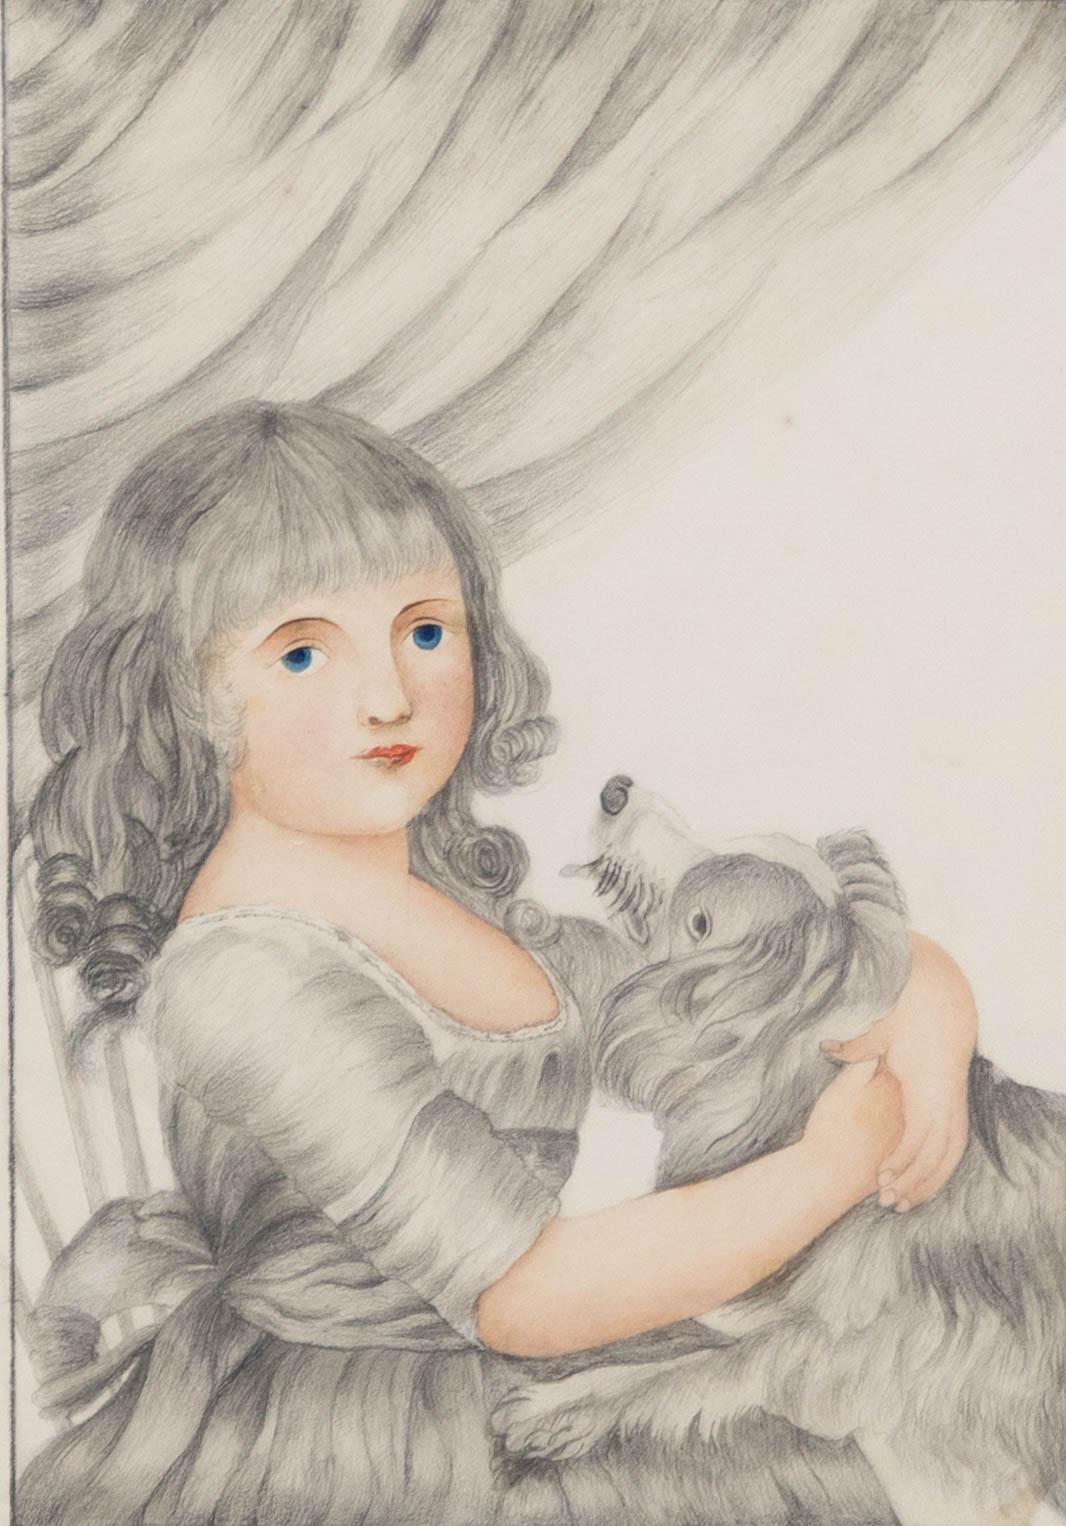 Acquired as a pair, this fine graphite drawing depicts a young Georgian girl petting a dog. Highlighted in watercolour on watermarked 'watman paper,1826'. The drawing has been well presented in a decorative gilt-effect frame with pierced detailing.